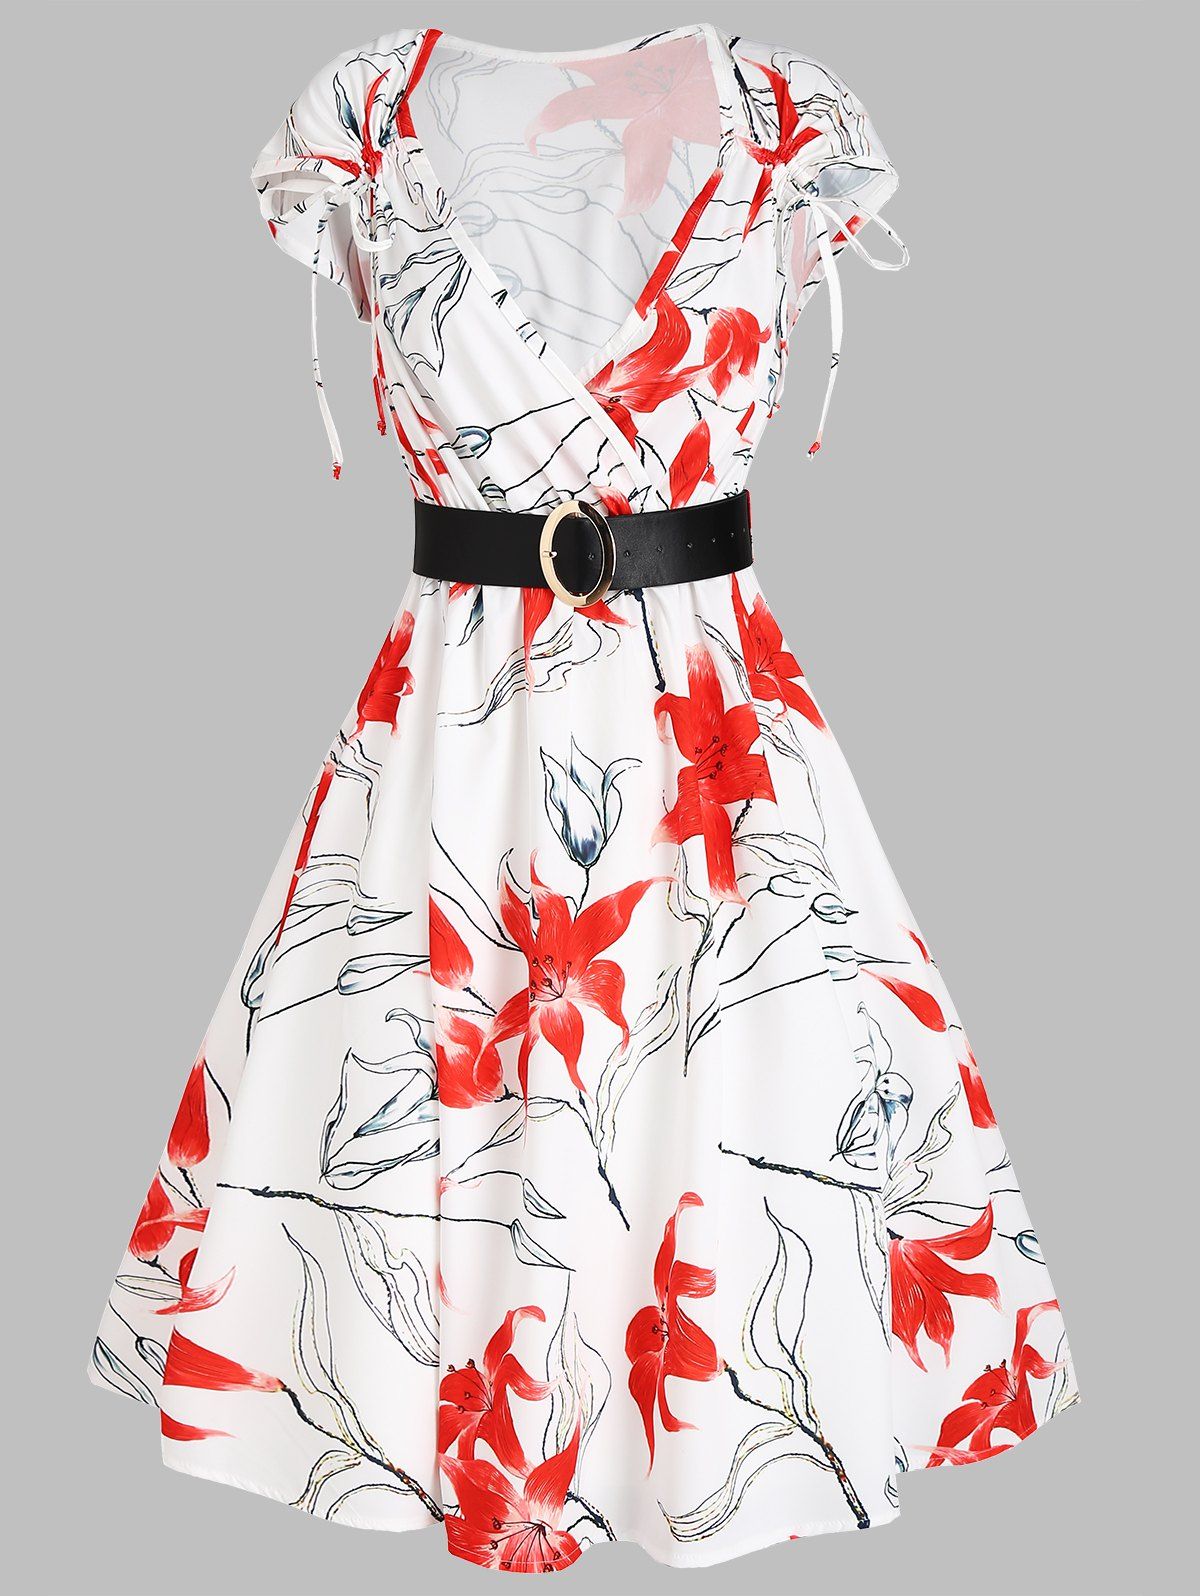 Vacation Casual A Line Knee Length Dress Floral Print Surplice Cinched Belted Plunging Summer Dress - WHITE XXL